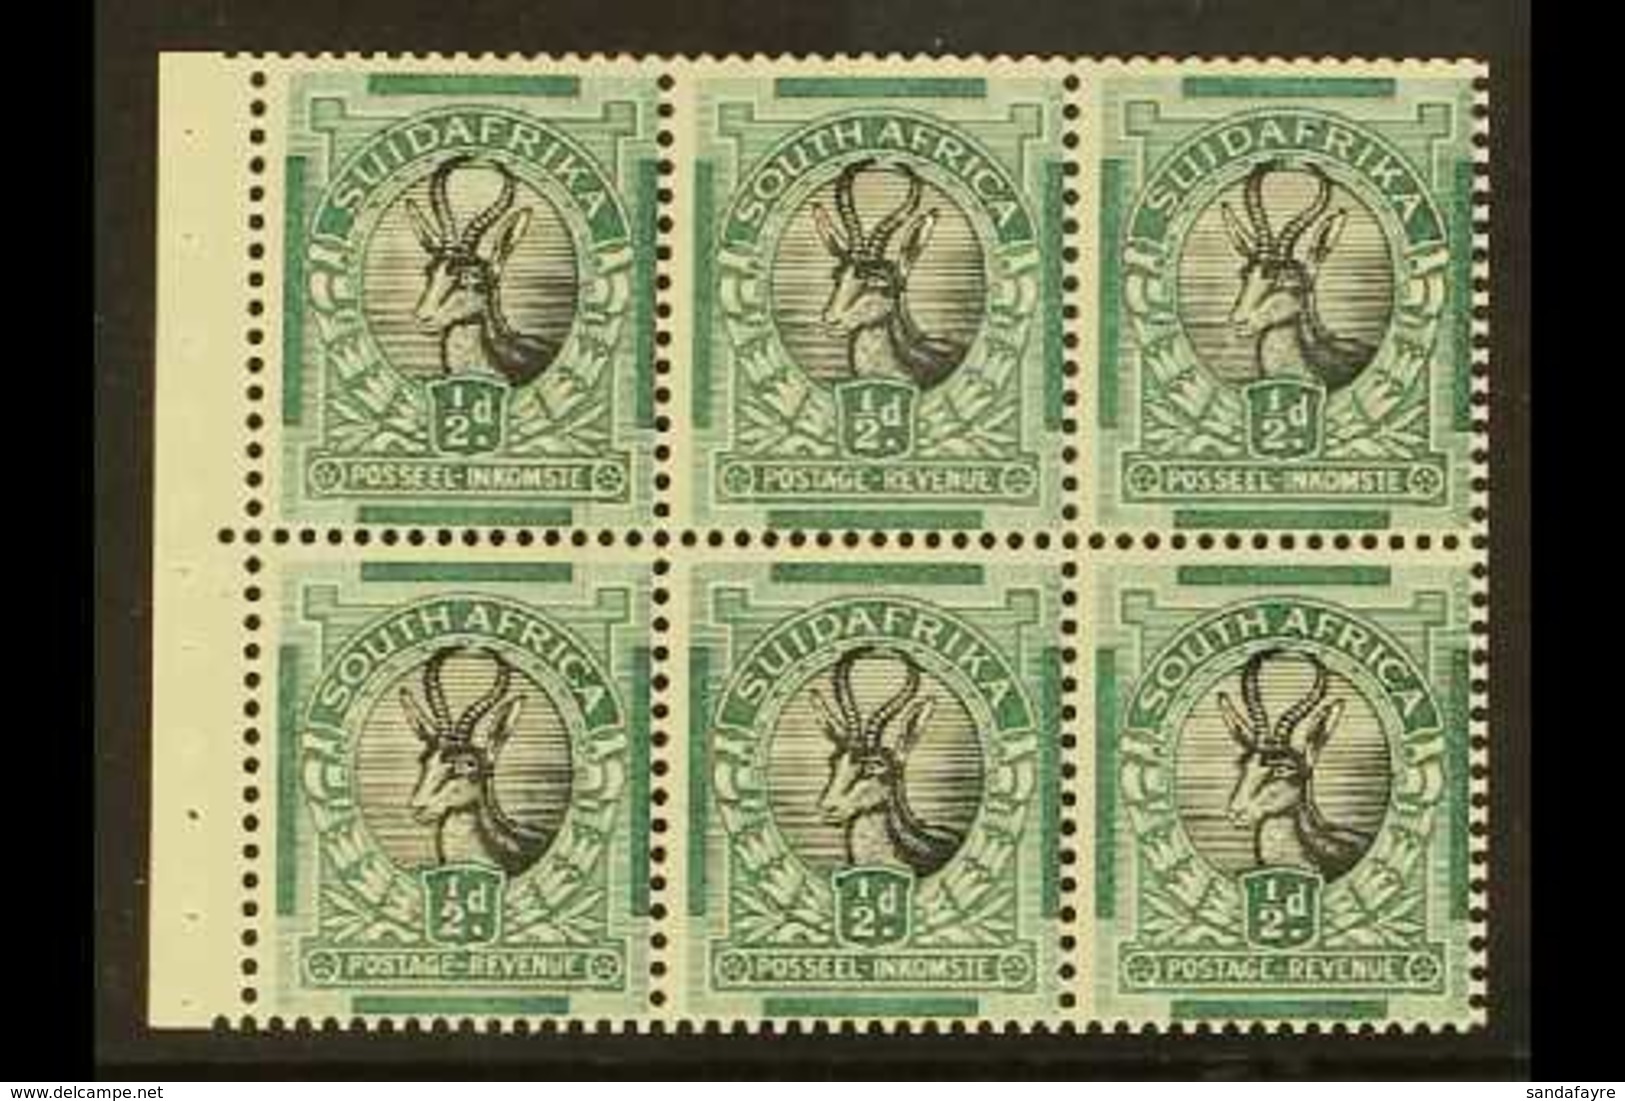 BOOKLET PANE 1930-1 ½d Watermark Upright, Afrikaans Stamp First, COMPLETE PANE OF SIX from Rare 1930 2s6d Or 1931 3s Rot - Unclassified